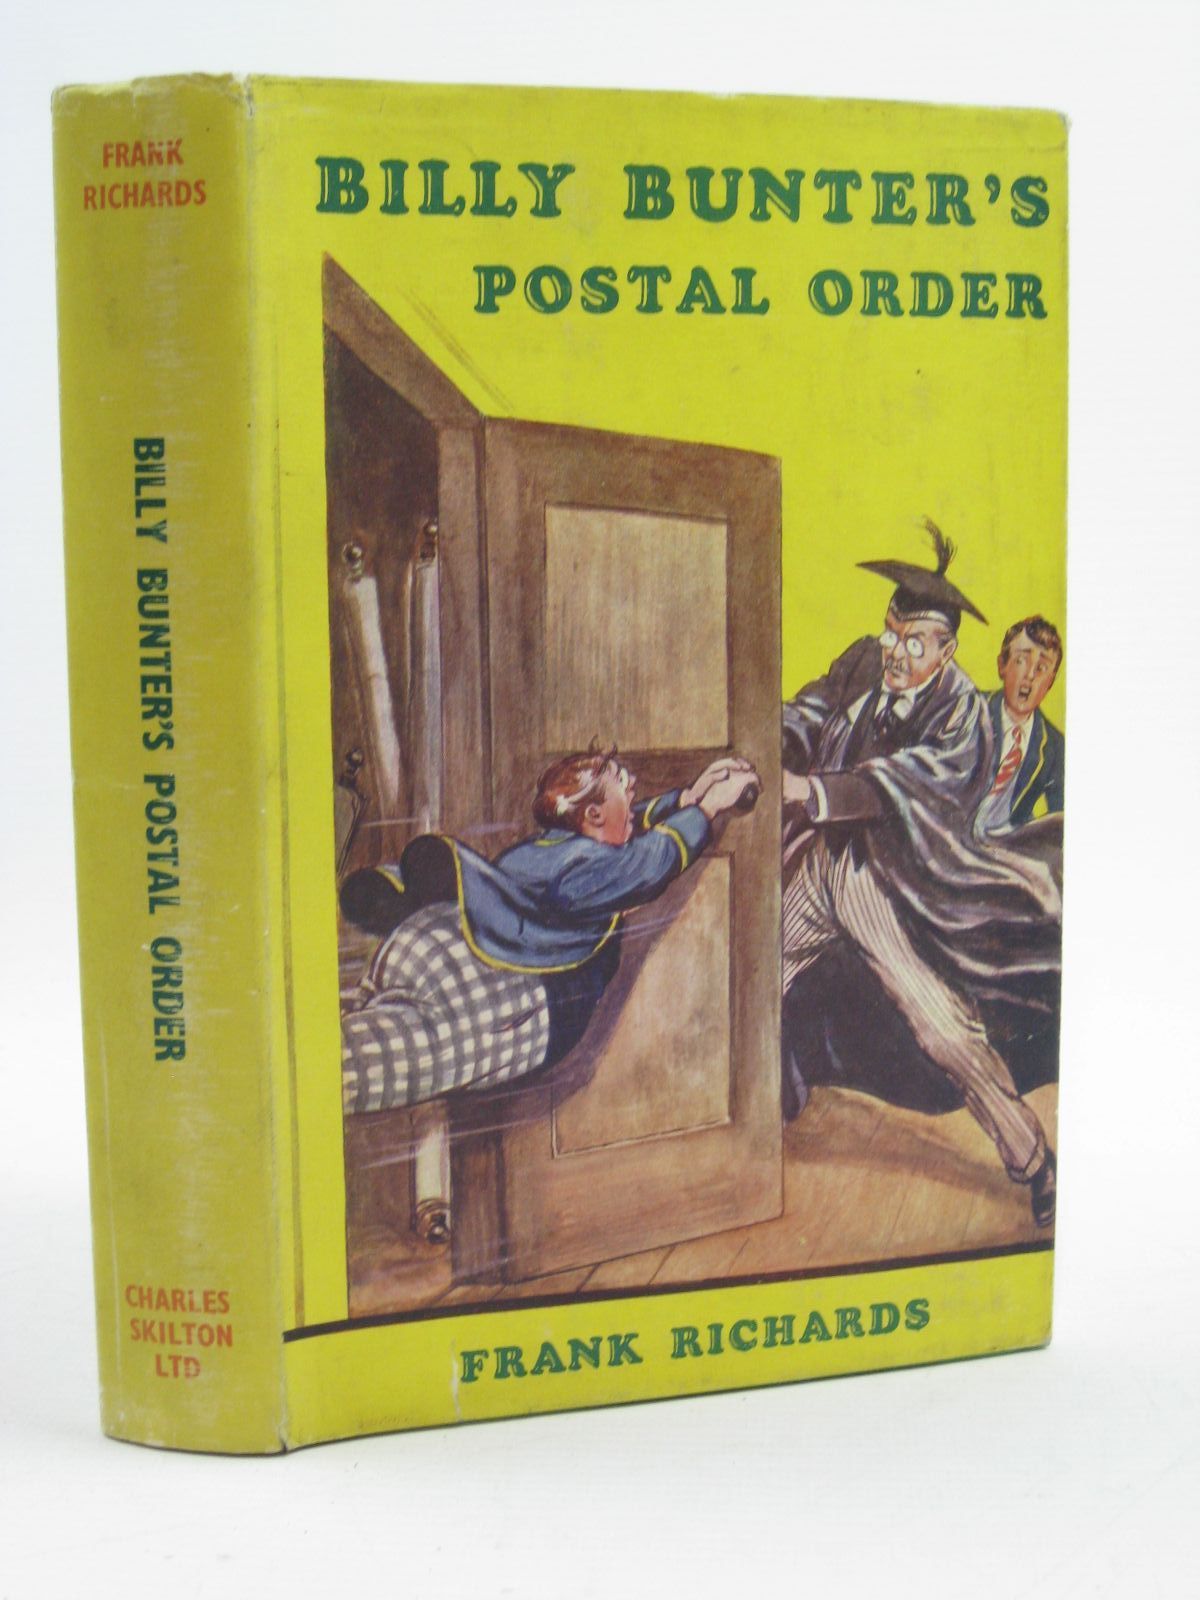 Cover of BILLY BUNTER'S POSTAL ORDER by Frank Richards